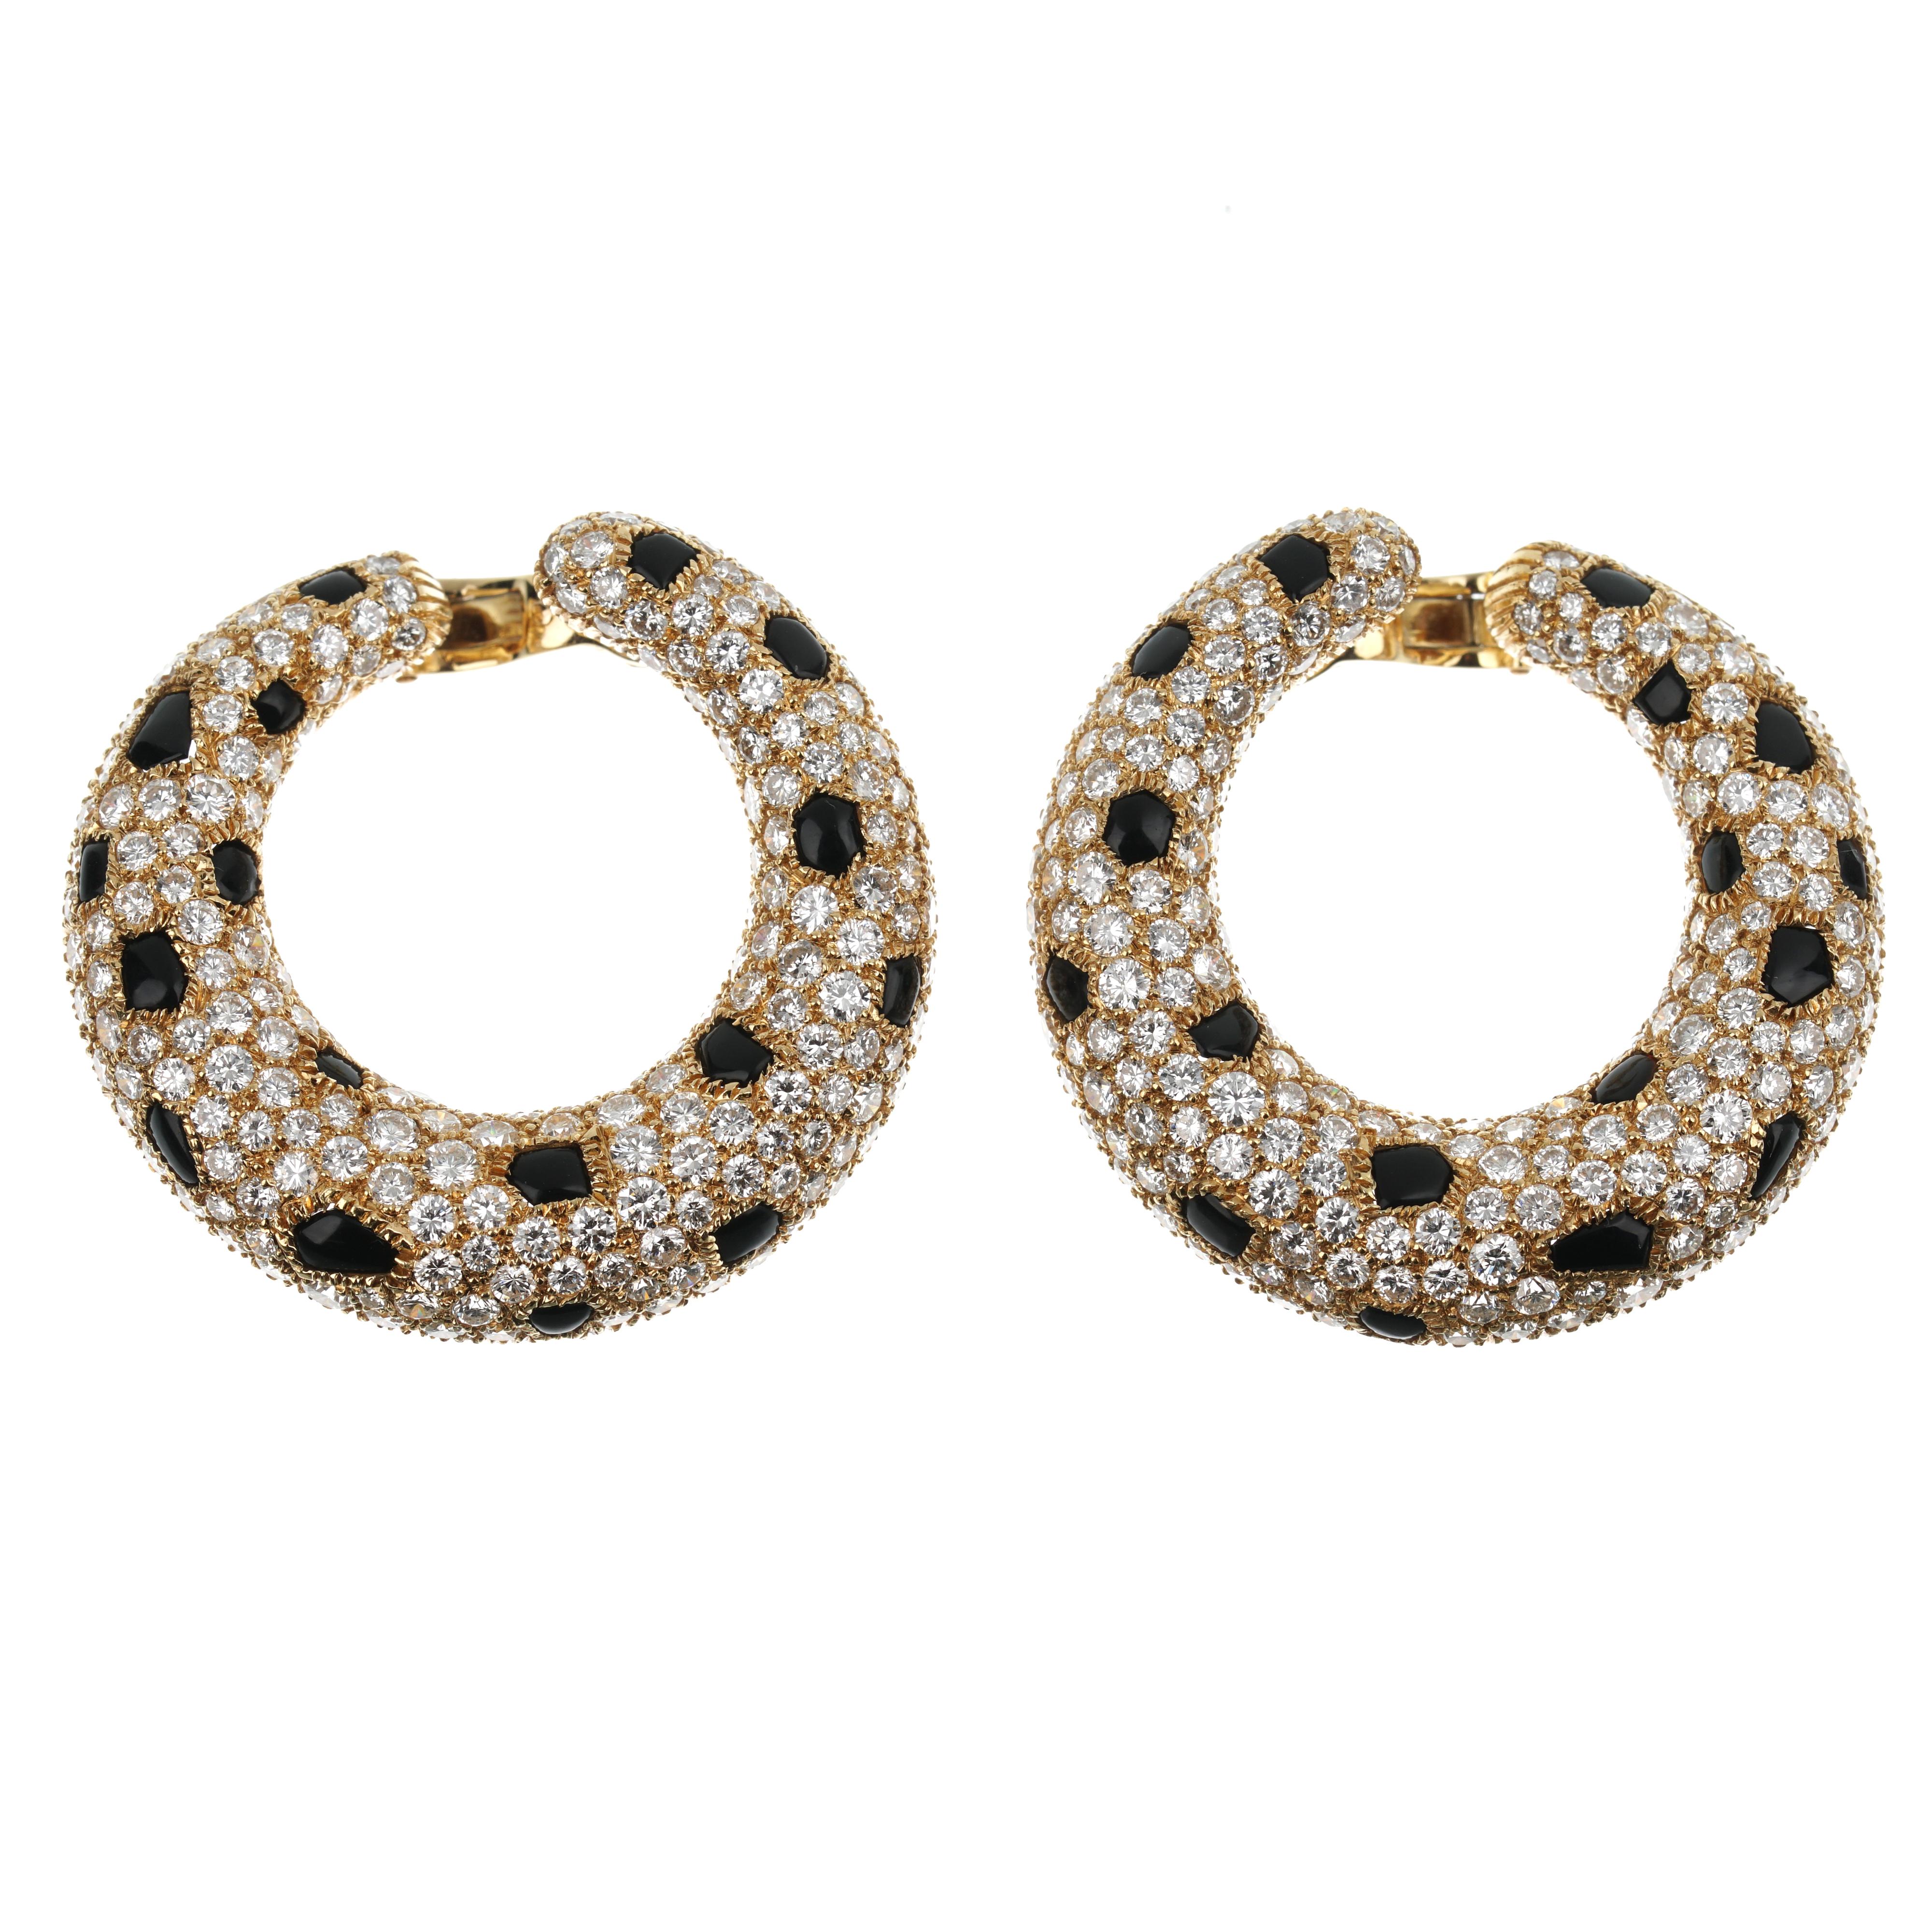 Cartier Panthere Onyx Diamond Yellow Gold Vintage Hoop Earrings In Excellent Condition For Sale In Feasterville, PA